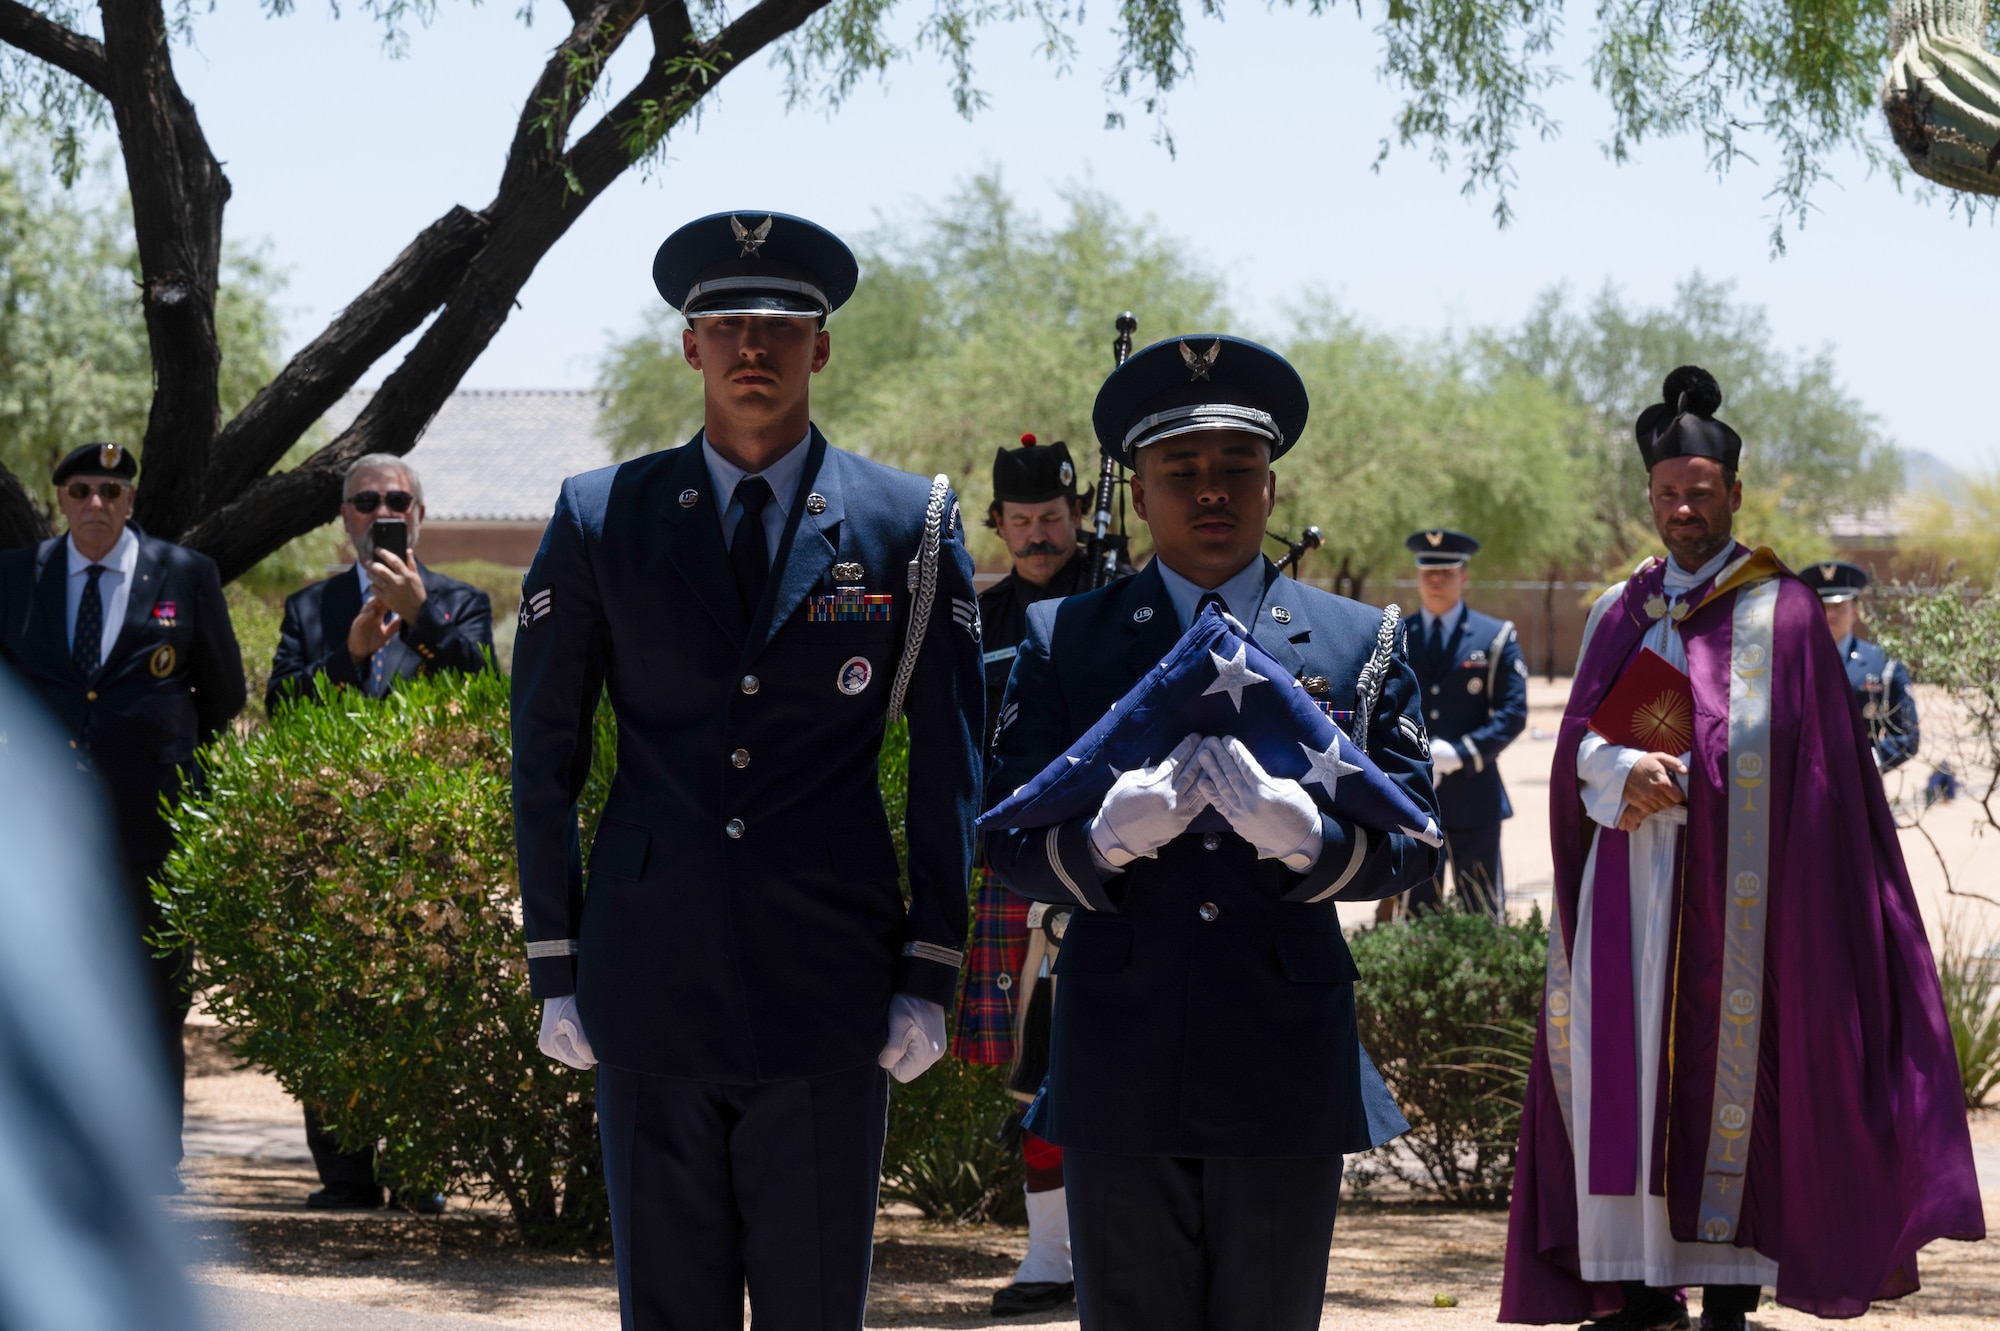 U.S. Air Force Senior Airman Tyler Smith and Airman 1st Class Andrew Liang, Luke Honor Guardsmen, conduct a flag folding ceremony at retired U.S. Air Force Lt. Col. Edwin “Skip” Hopler’s funeral and internment, at the National Memorial Cemetery, June 6, 2023, in Phoenix, Arizona.